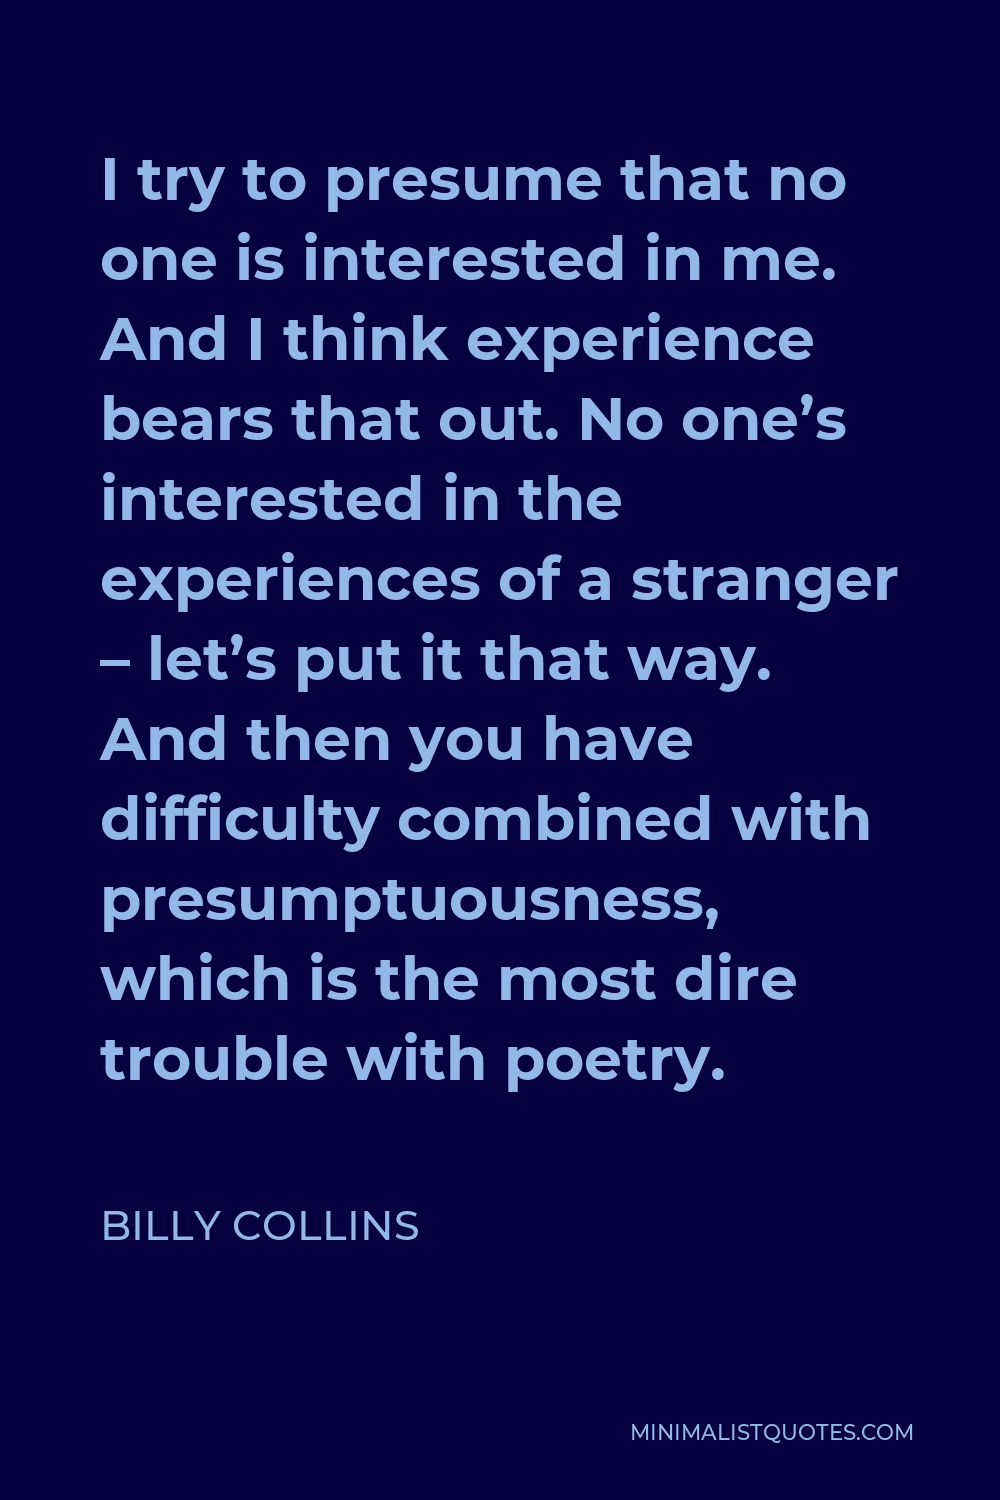 Billy Collins Quote - I try to presume that no one is interested in me. And I think experience bears that out. No one’s interested in the experiences of a stranger – let’s put it that way. And then you have difficulty combined with presumptuousness, which is the most dire trouble with poetry.